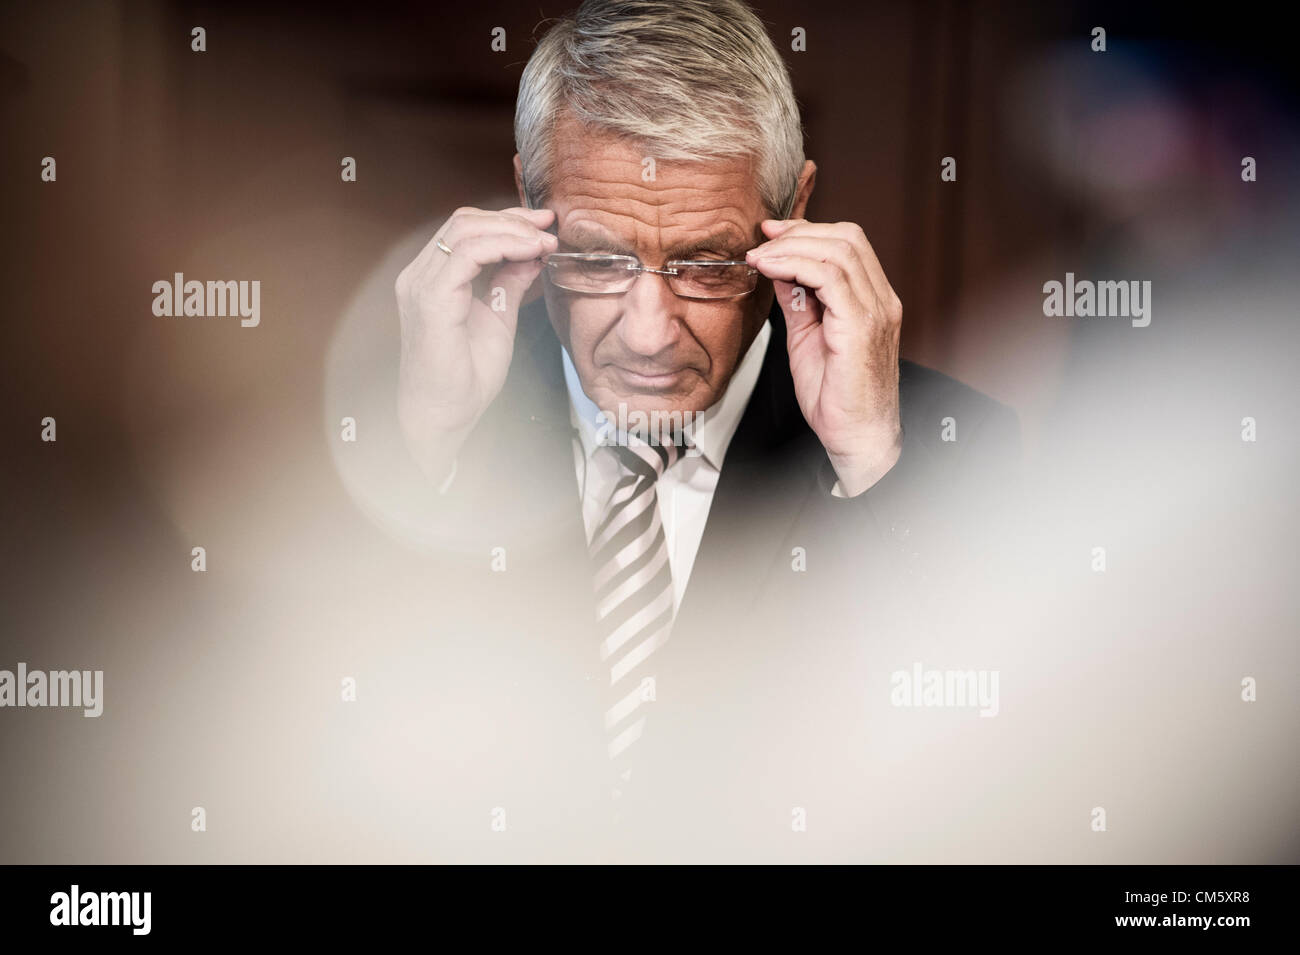 Oslo, Norway. 12th October 2012. Norwegian Nobel Committee Chairman Thorbjoern Jagland announce that EU (European Union) wins the The Nobel Peace Prize 2012 Credit: © Alexander Widding / Alamy Live News  Stock Photo